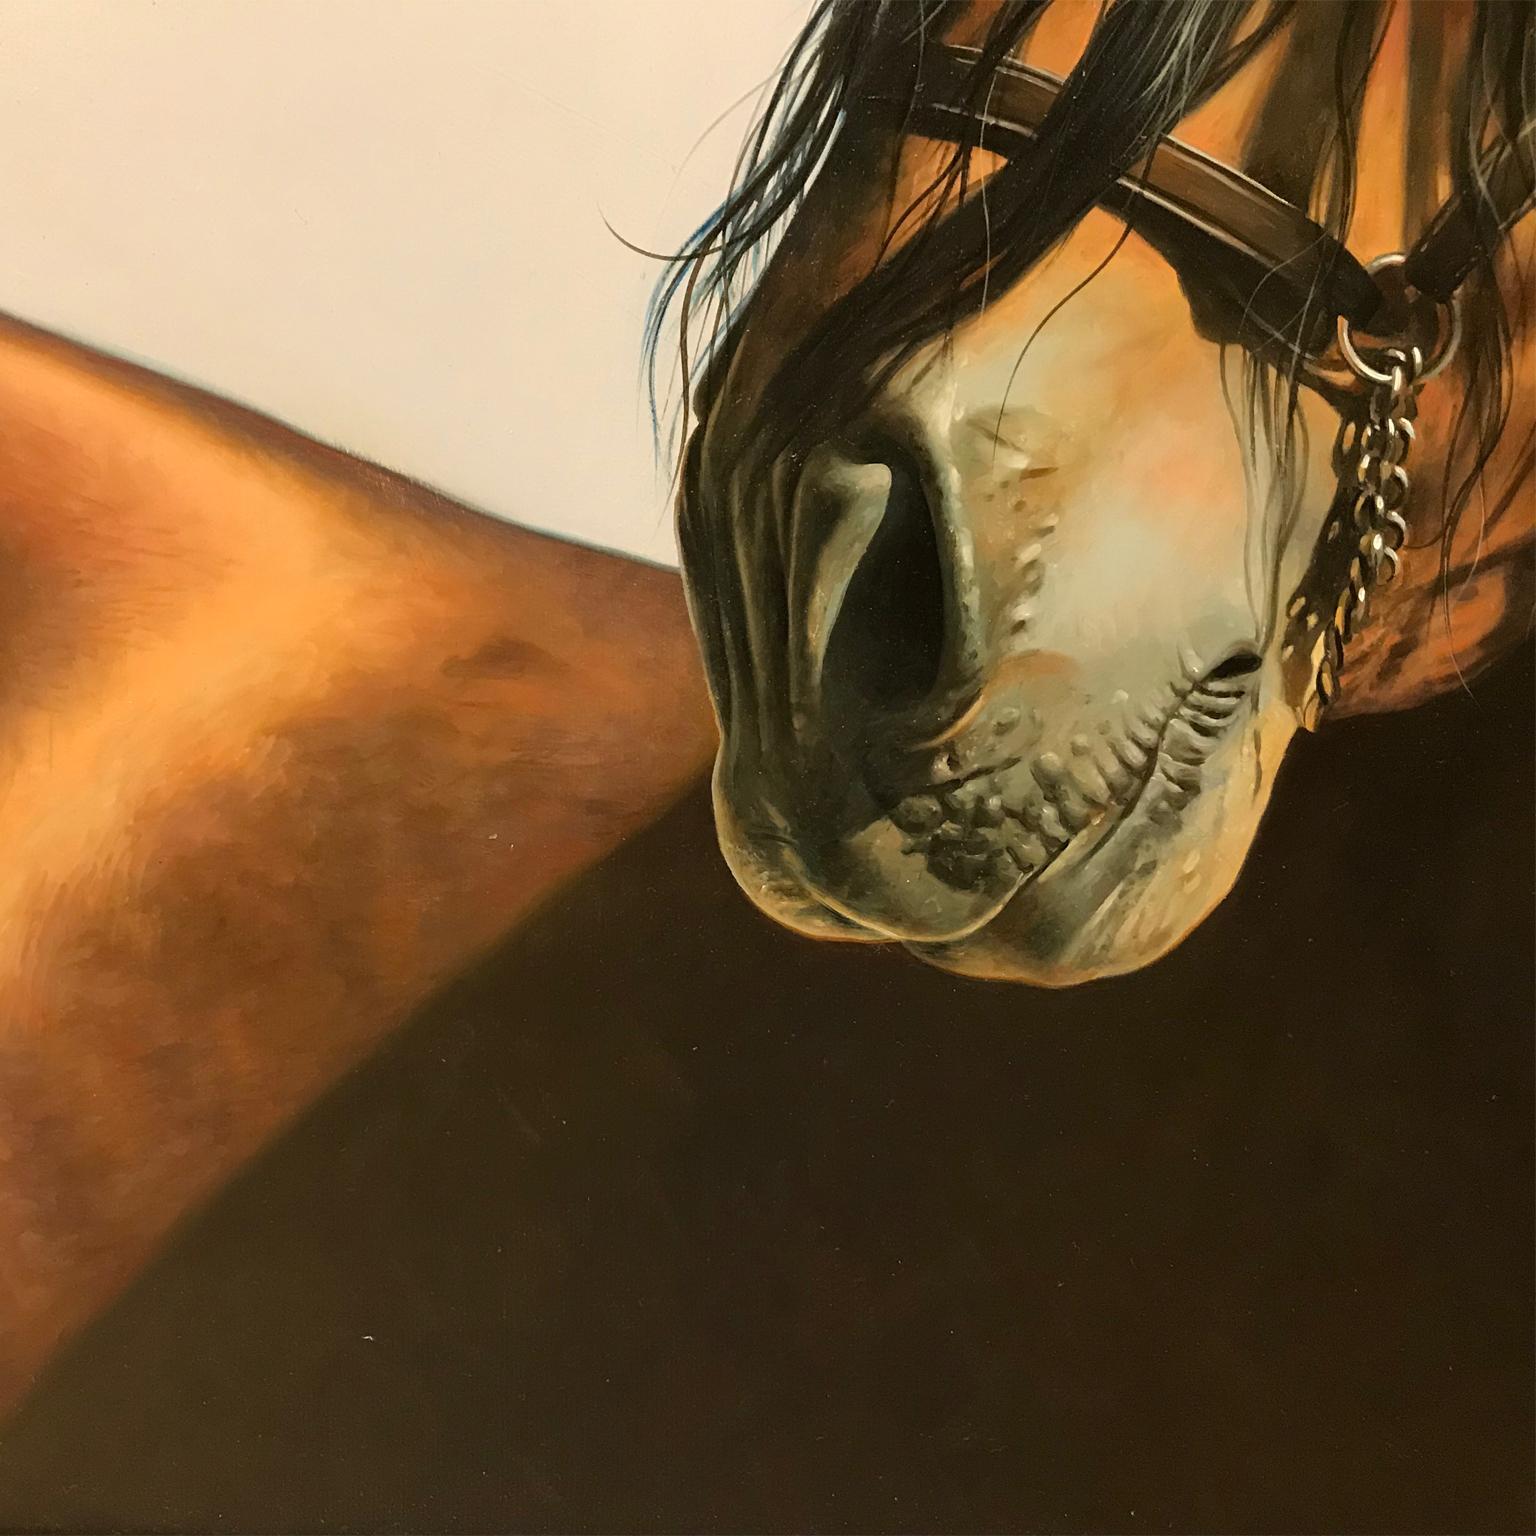 Realism - Hyperrealism-  Brown horse.
He was born in Malaga in 1973.

He studied at the Art School in his hometown, where he soon noted for his extraordinary skill.

His art is spontaneous, detailed and unquestionable  did not receive the learned